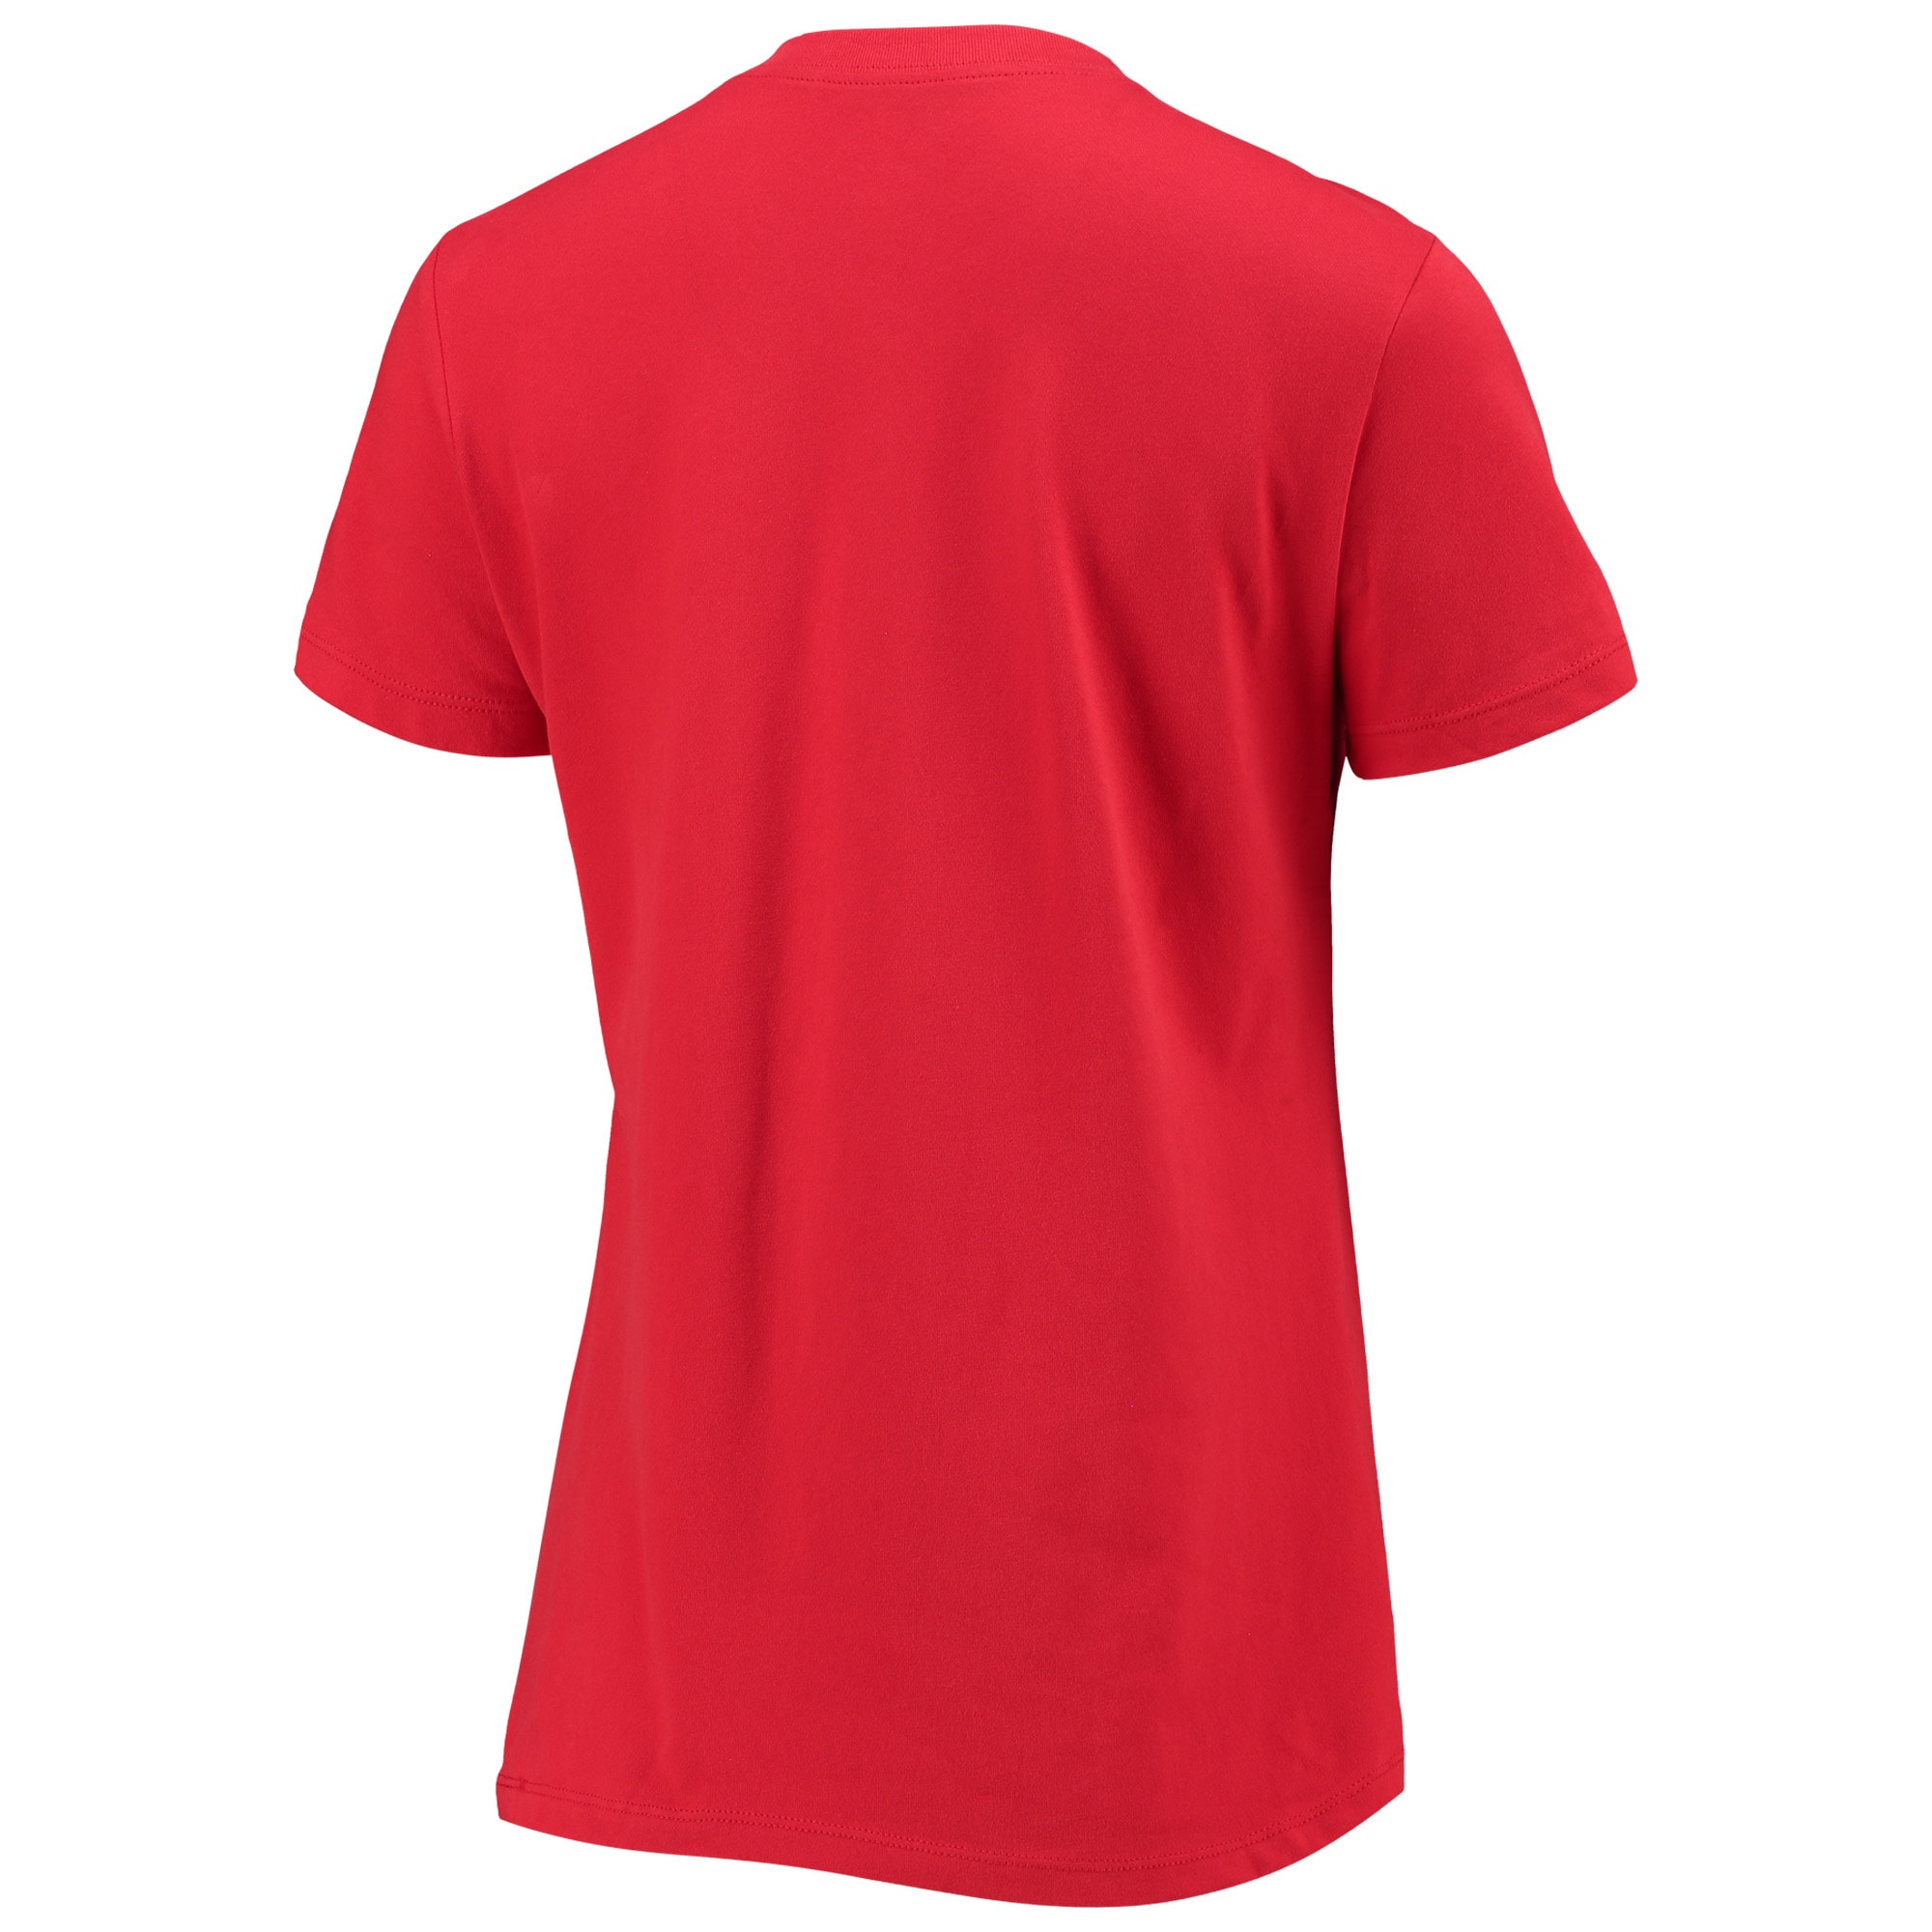 Women's Nike Red Team USA Performance T-Shirt - image 3 of 3